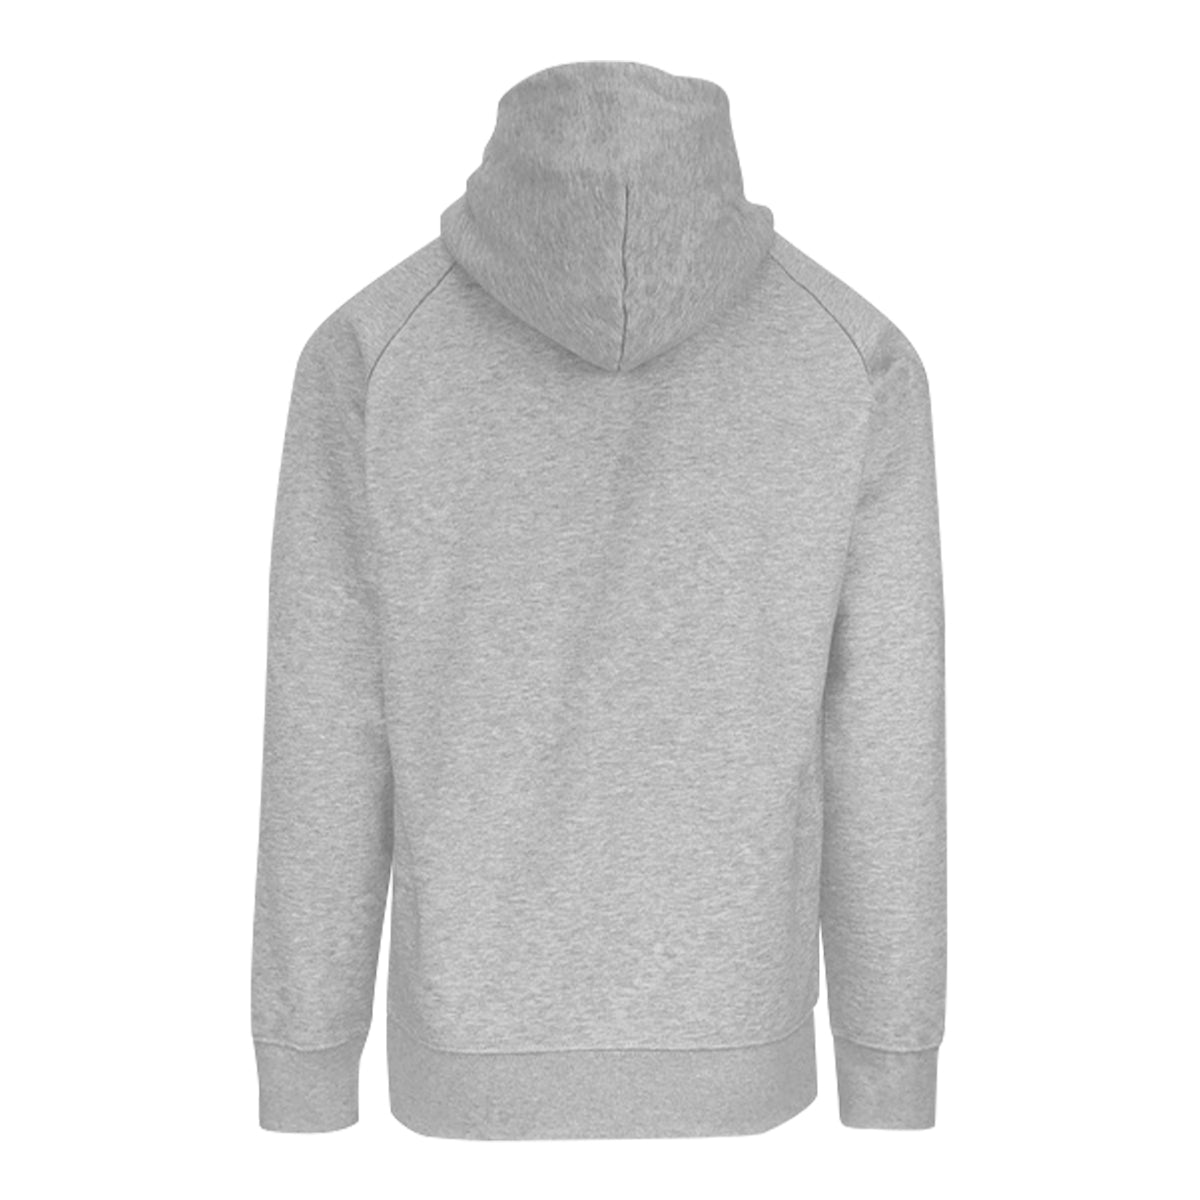 GNC Full Sleeves Grey Hoodie | Sports Wear | 100% Cotton | Signed By John Abraham - 